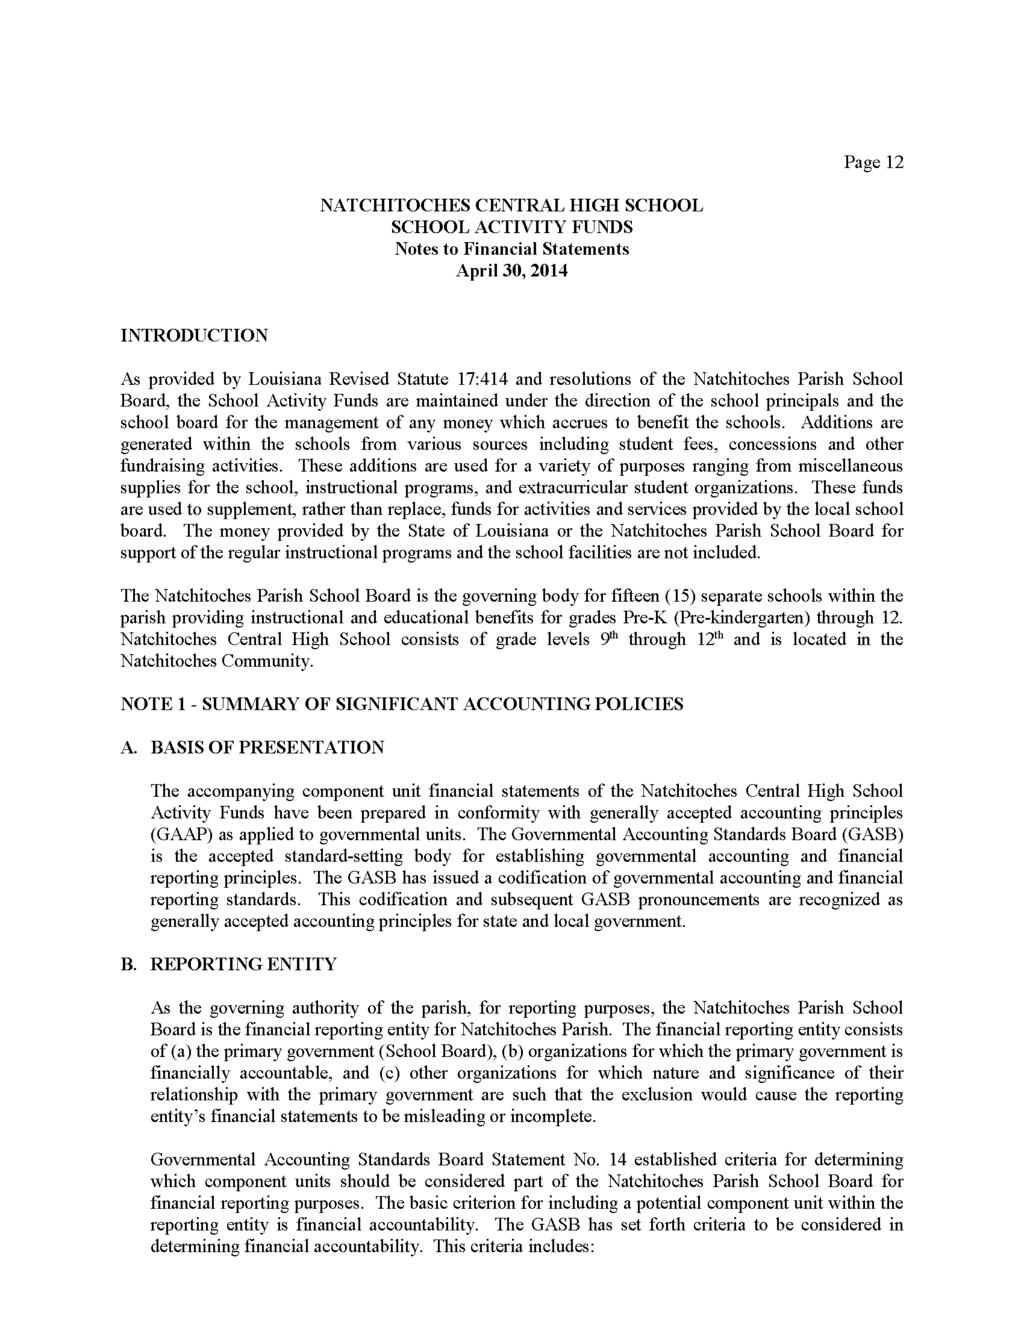 Page 12 Notes to Financial Statements April 3,214 INTRODUCTION As provided by Louisiana Revised Statute 17:414 and resolutions of the Natchitoches Parish School Board, the School Activity Funds are